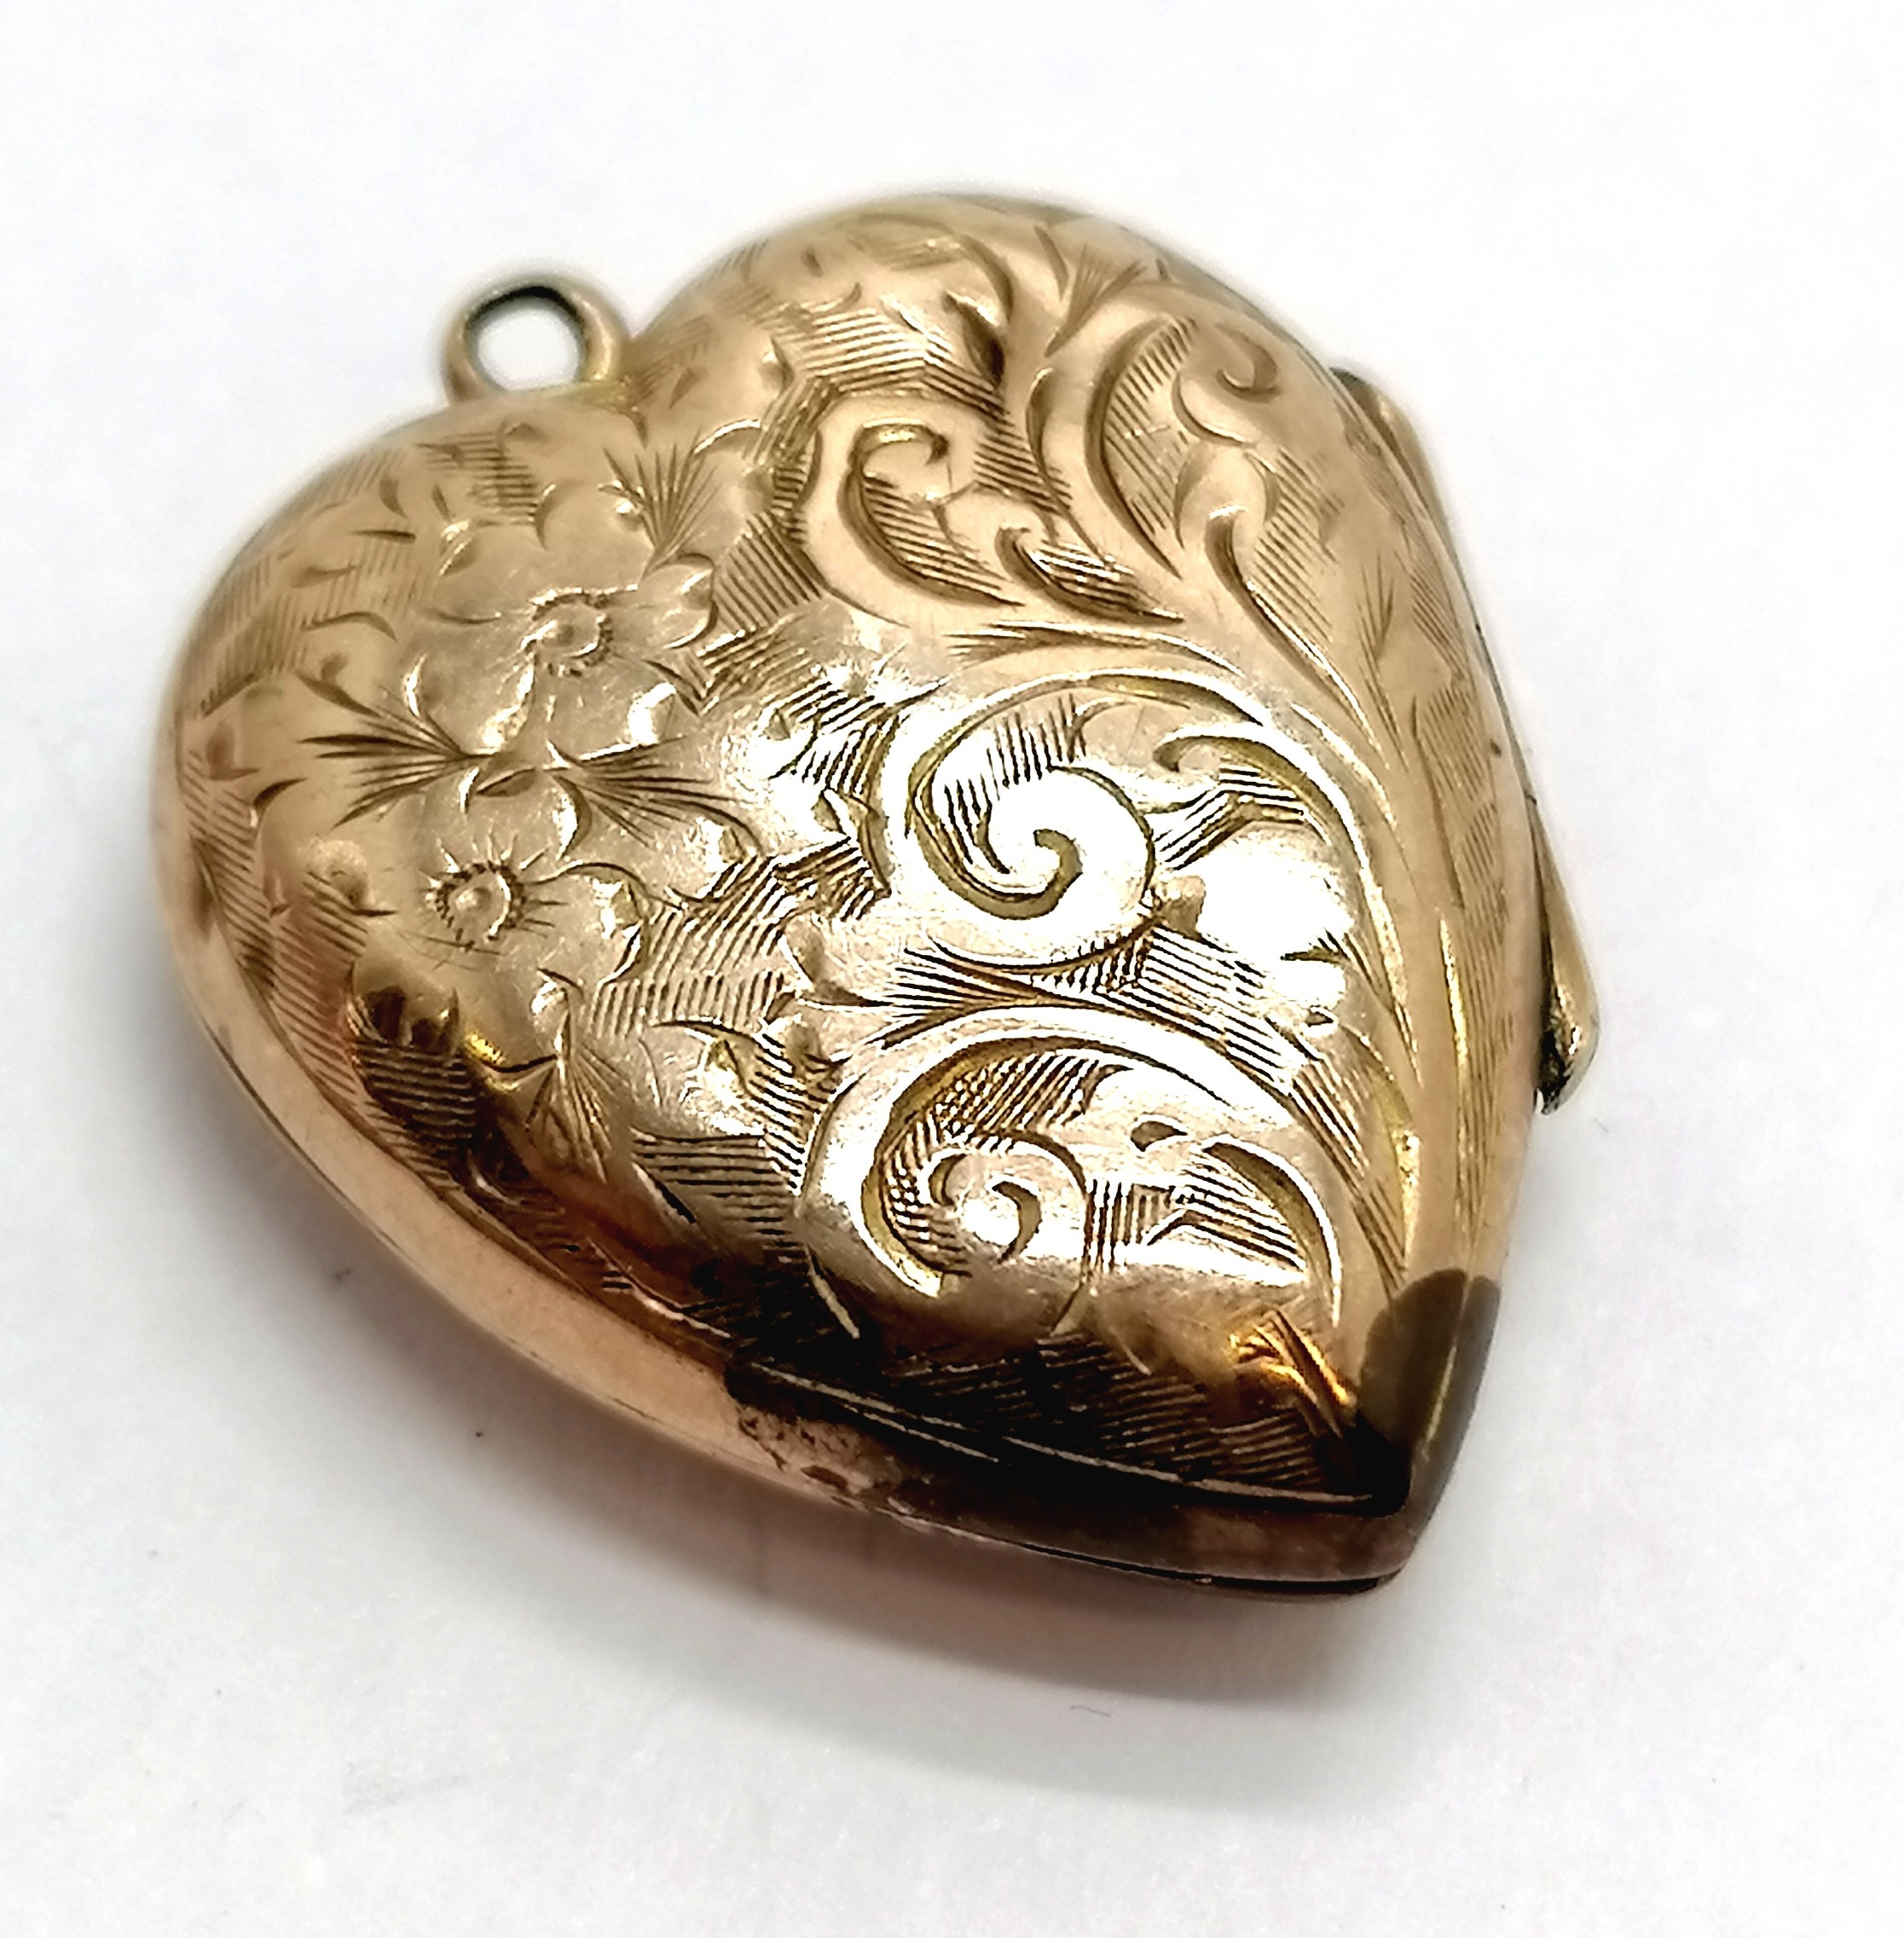 Unmarked 9ct gold heart shaped locket with engraved detail - 2cm drop & 2.3g and has dents